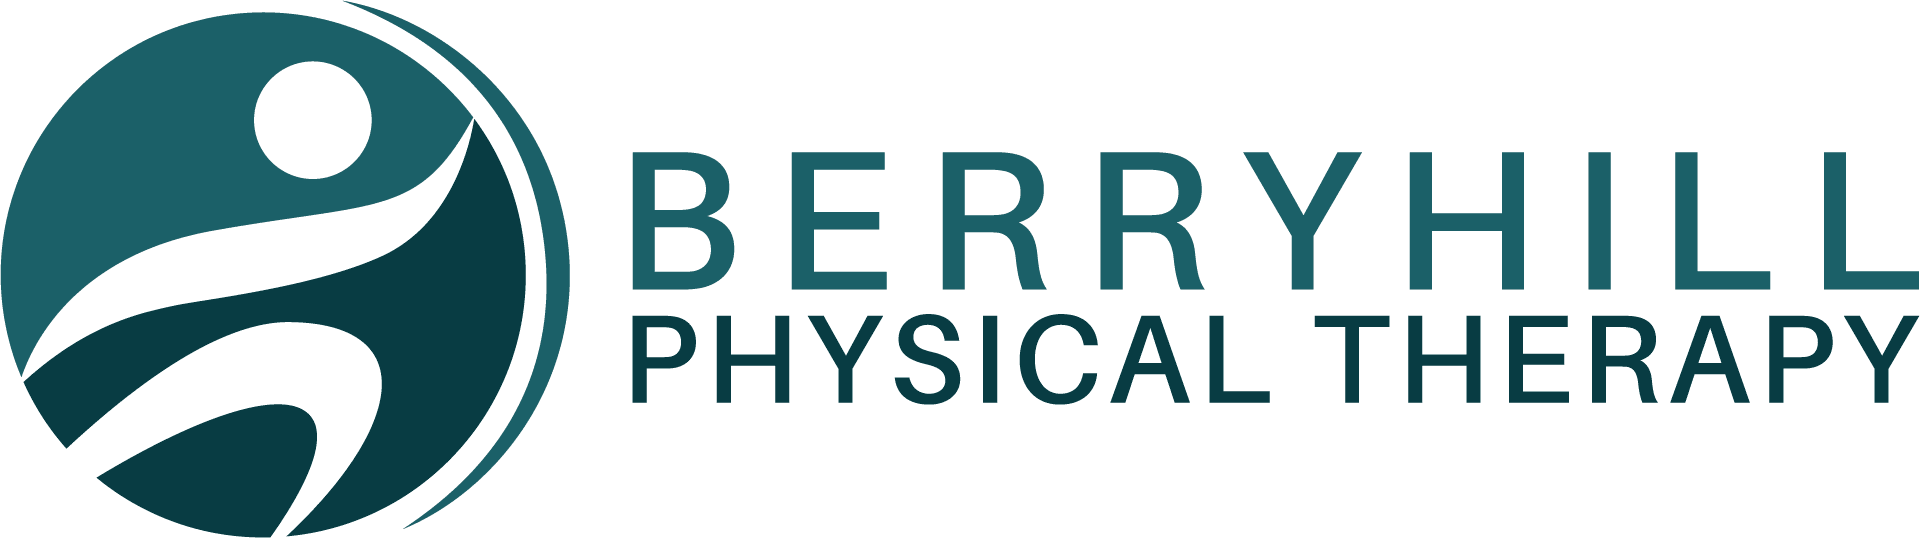 Berryhill Physical Therapy